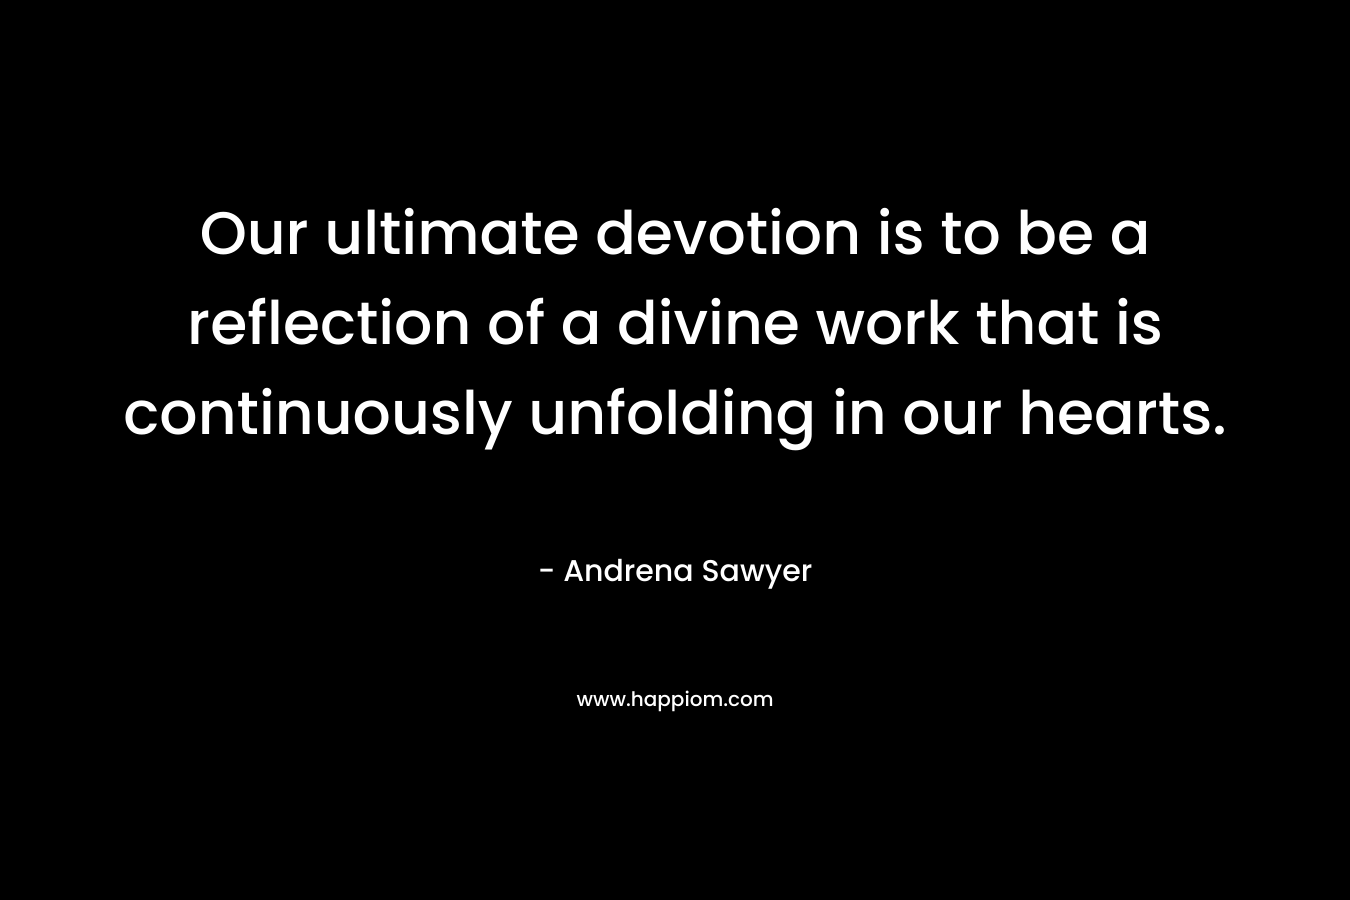 Our ultimate devotion is to be a reflection of a divine work that is continuously unfolding in our hearts.